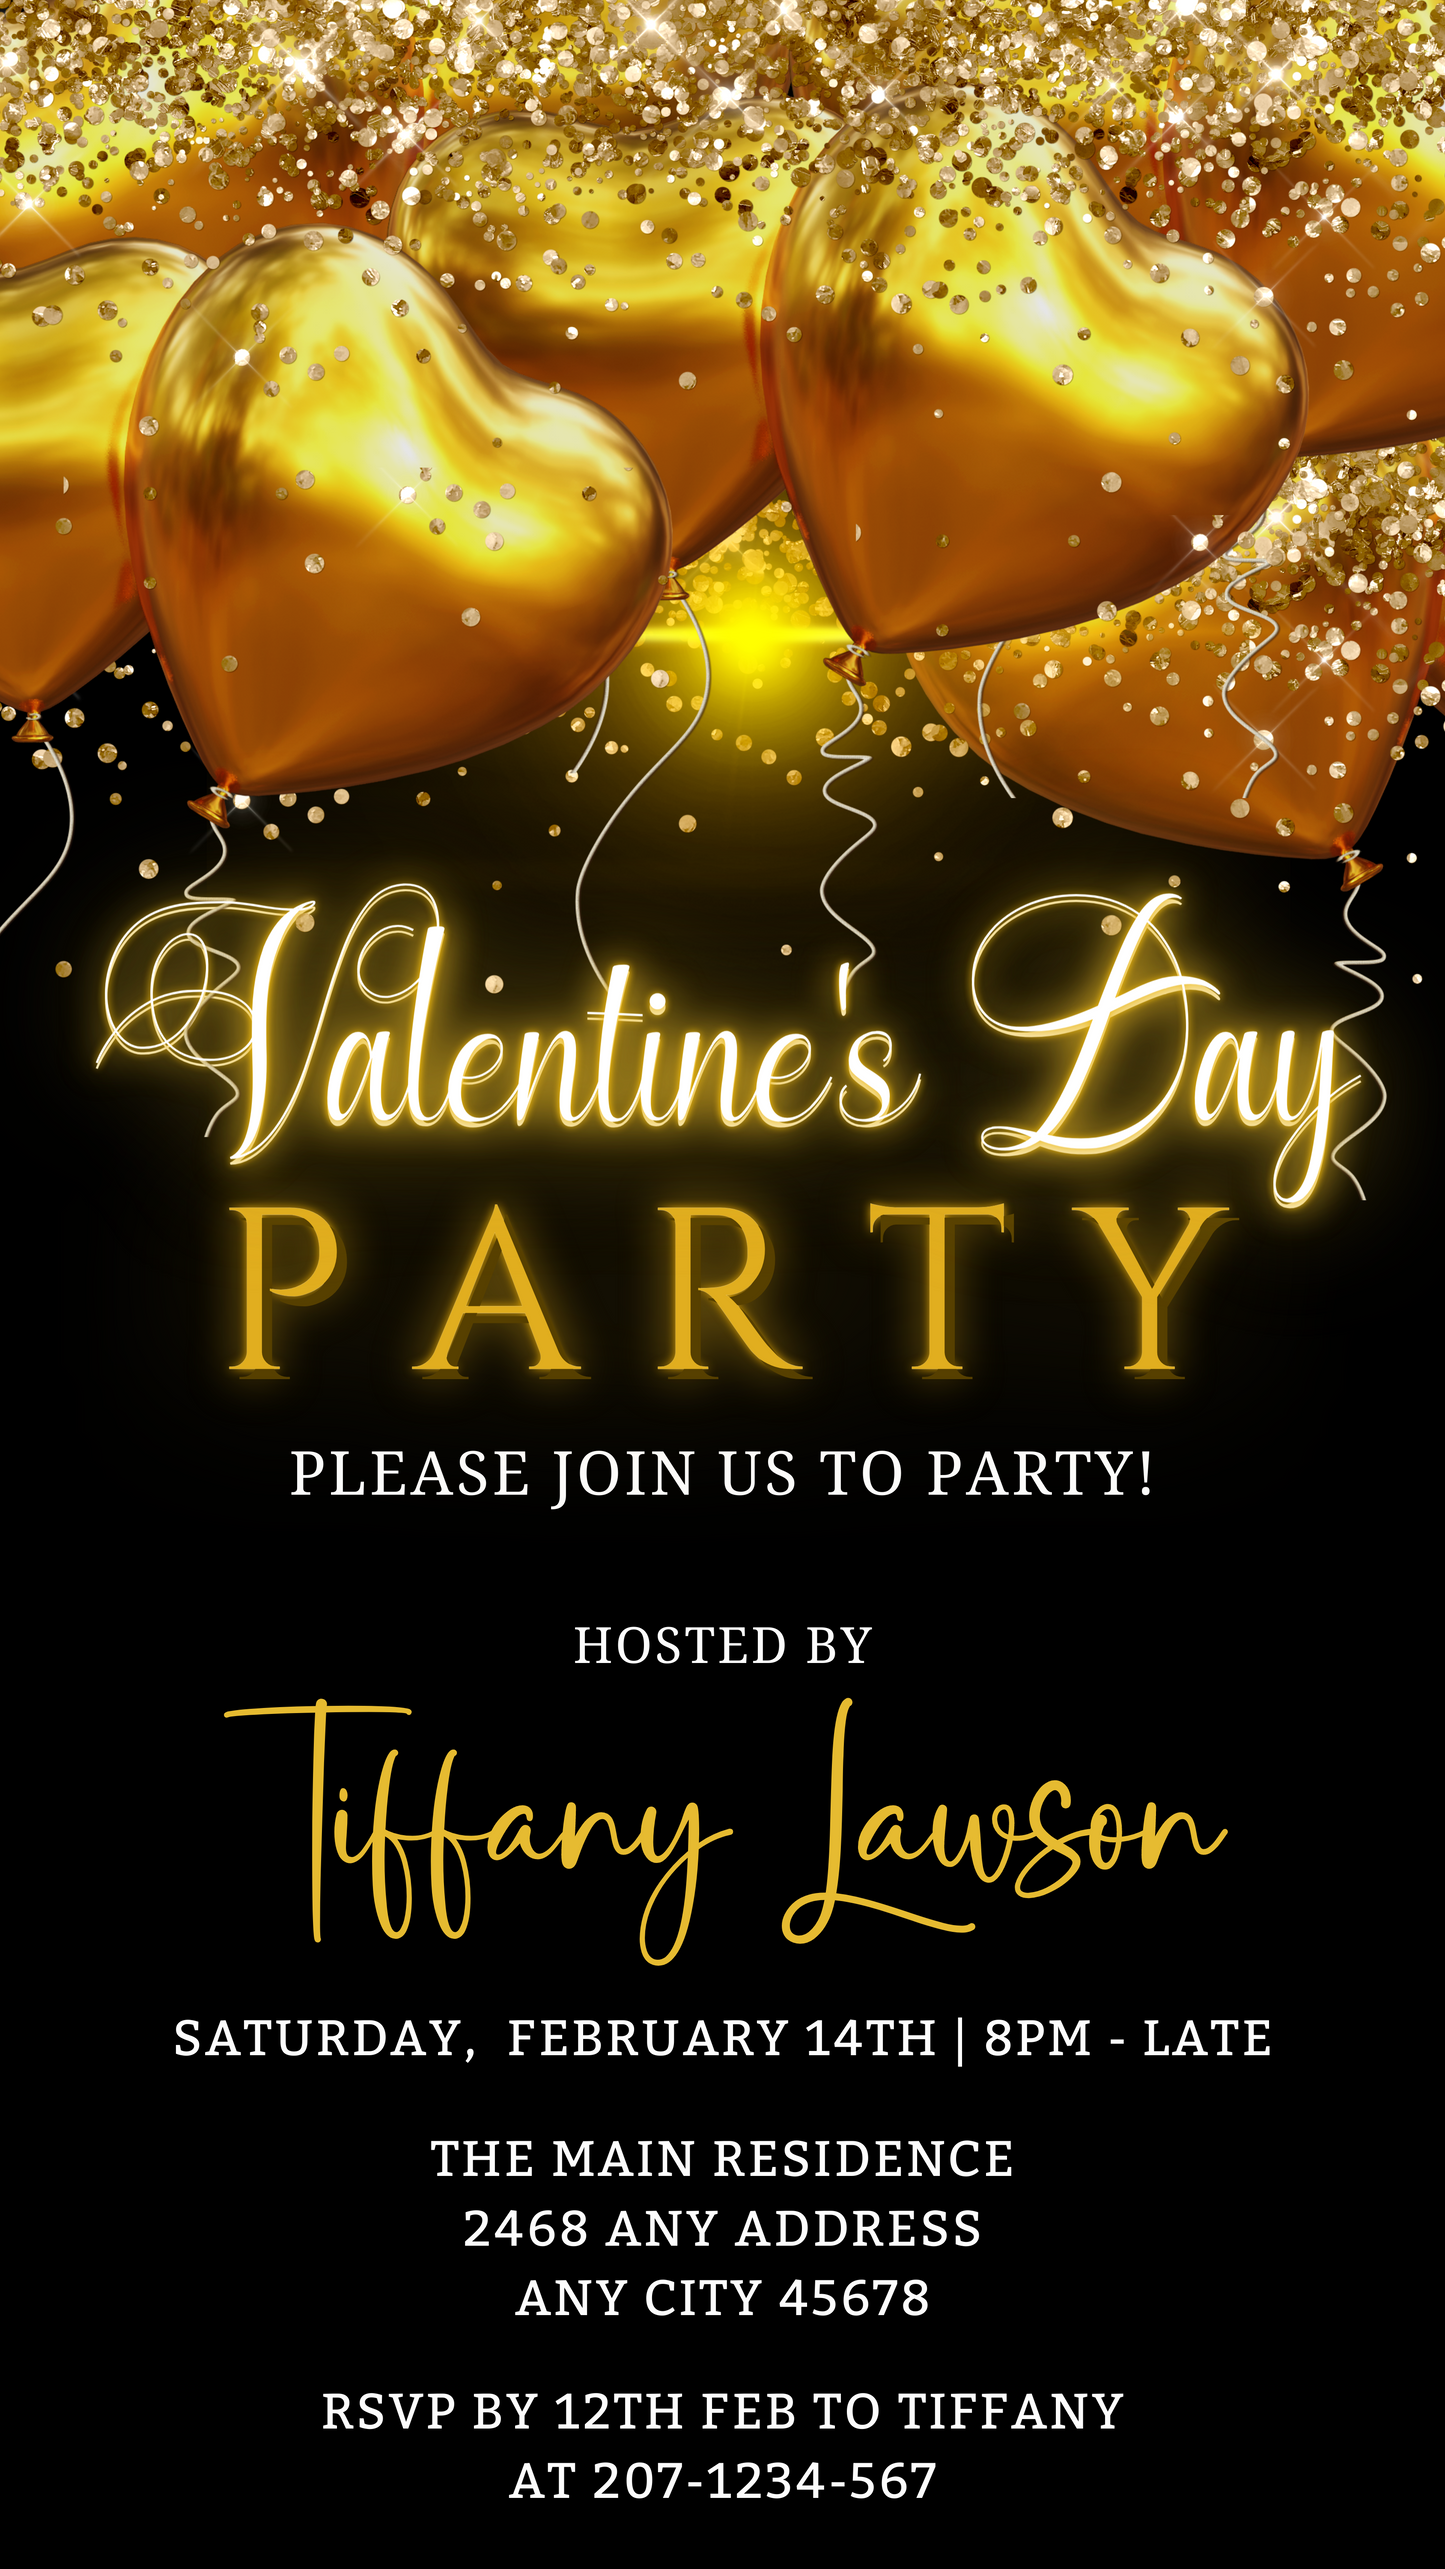 Neon Golden Heart Balloons | Valentines Party Evite, featuring customizable text and glittery gold heart designs, editable via Canva for digital invitations.